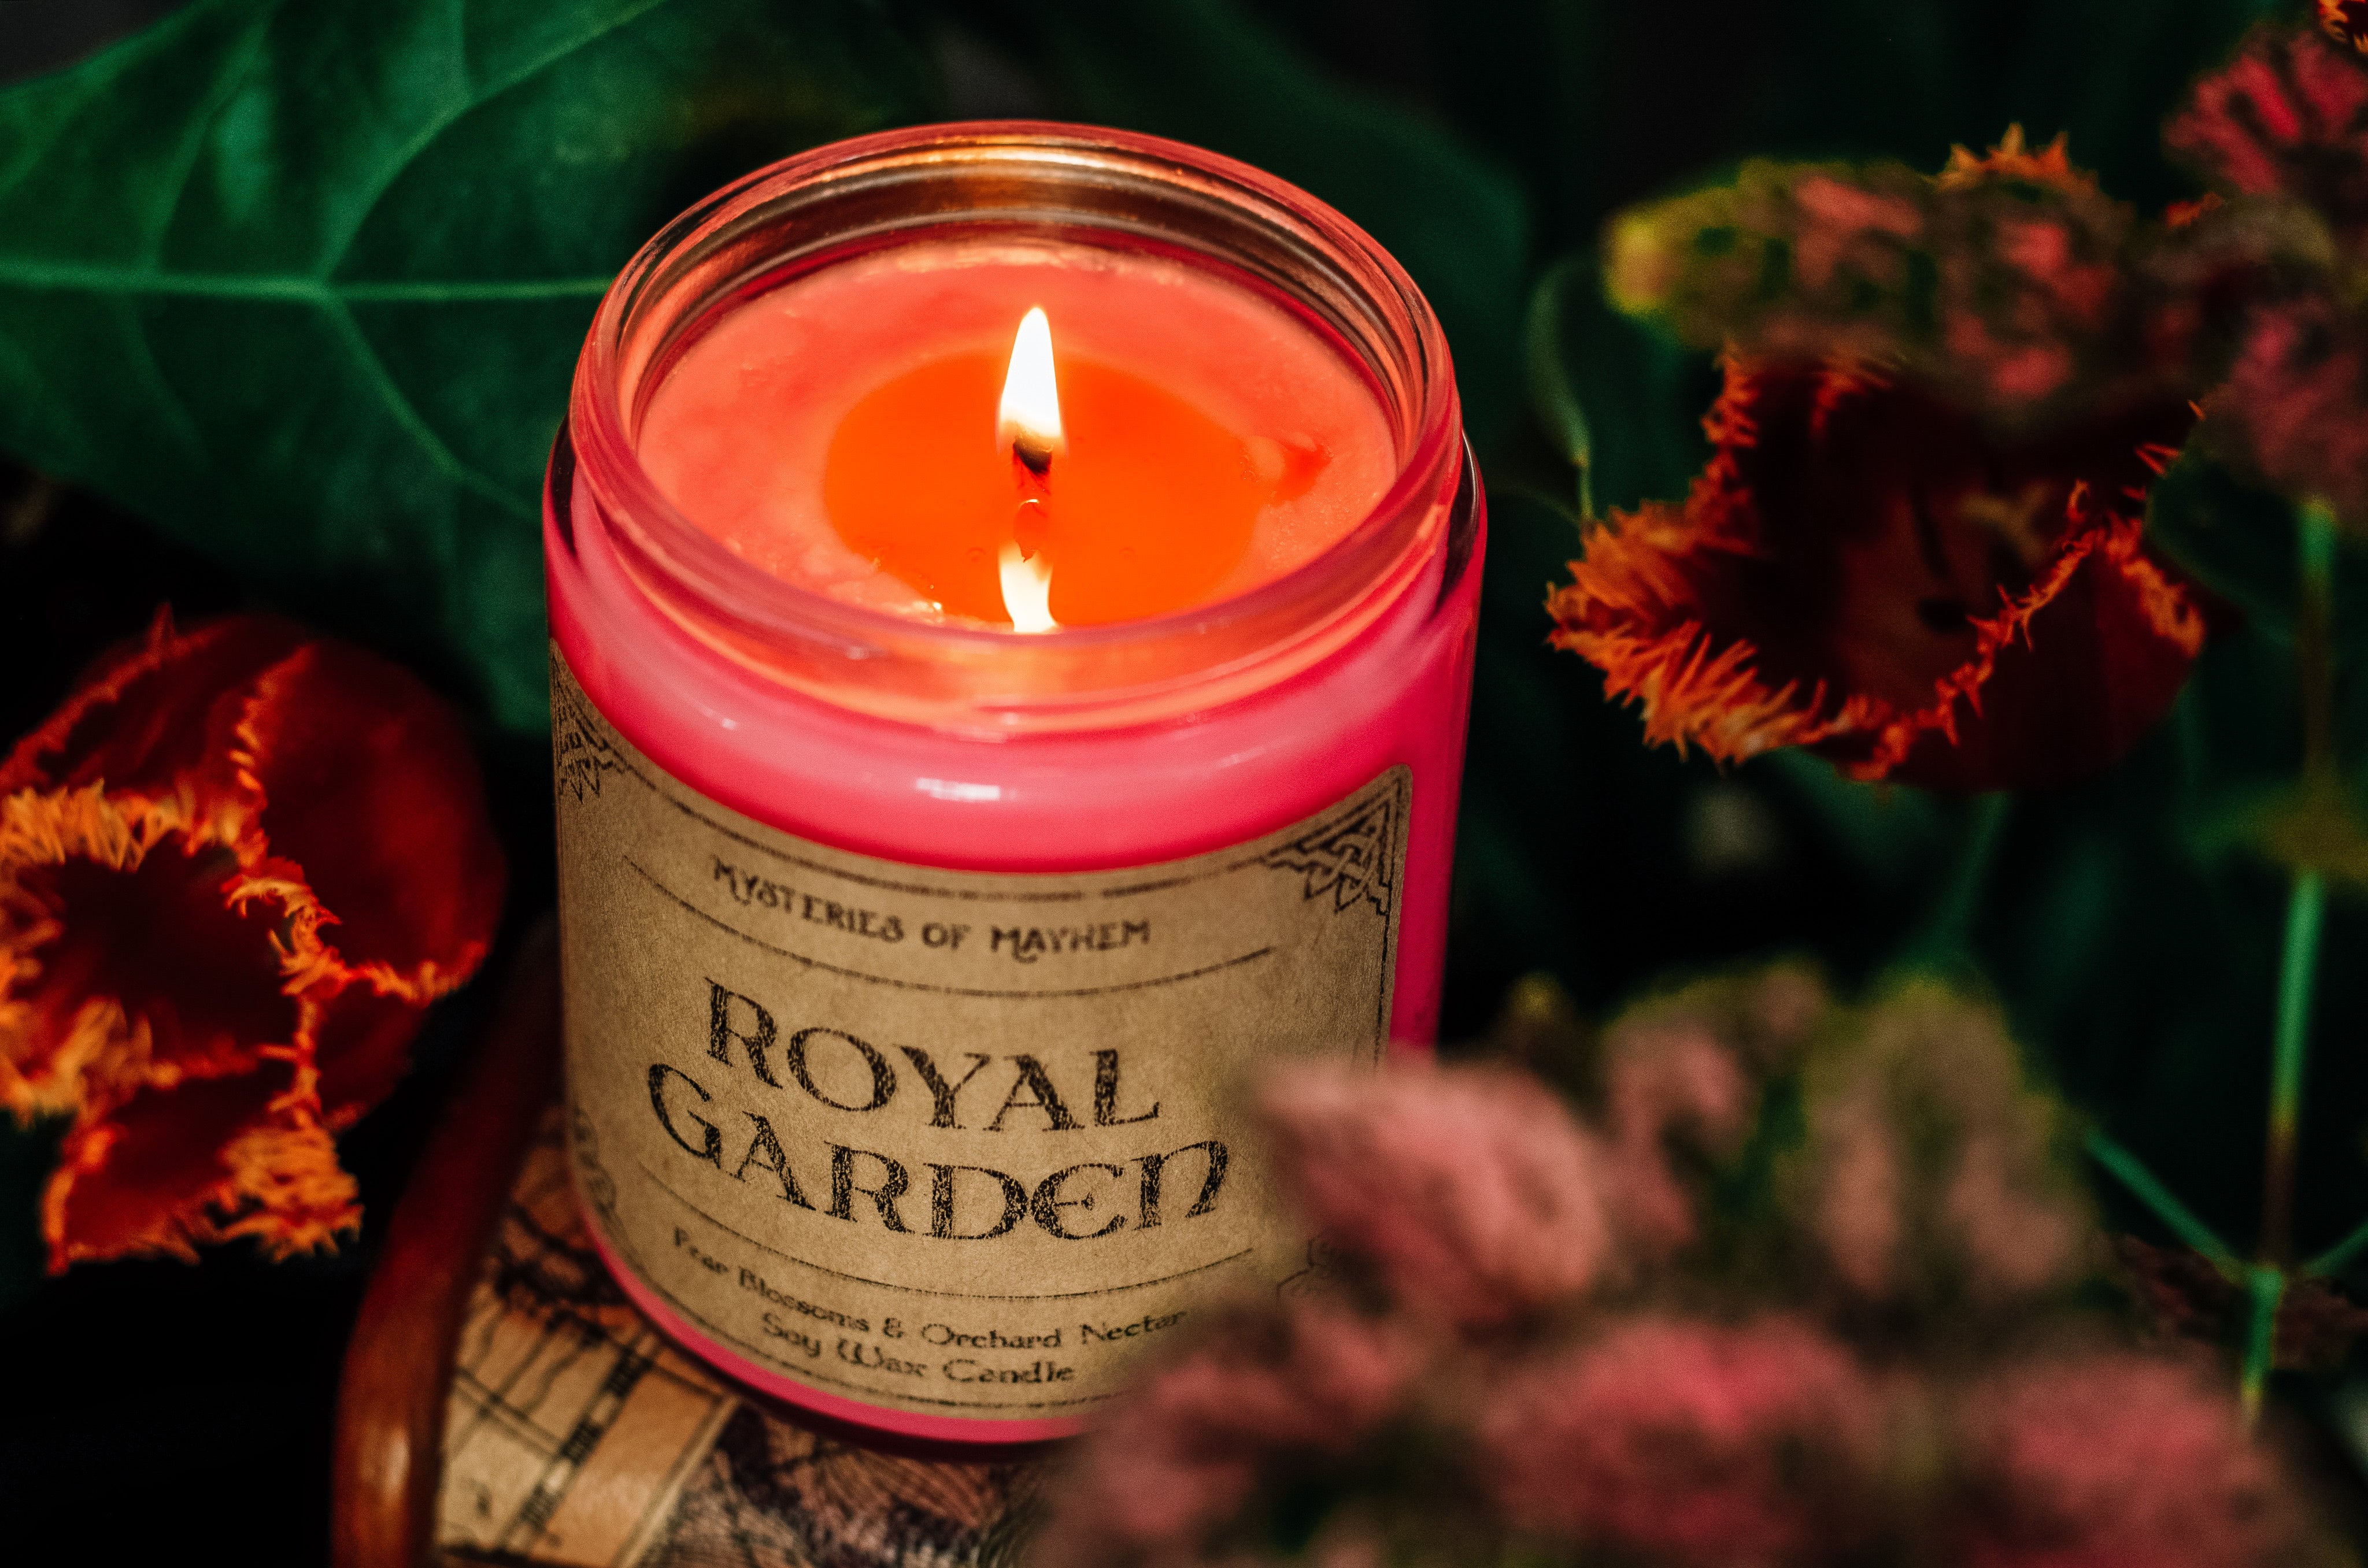 Royal Garden - Pear Blossoms and Orchard Nectar Scented